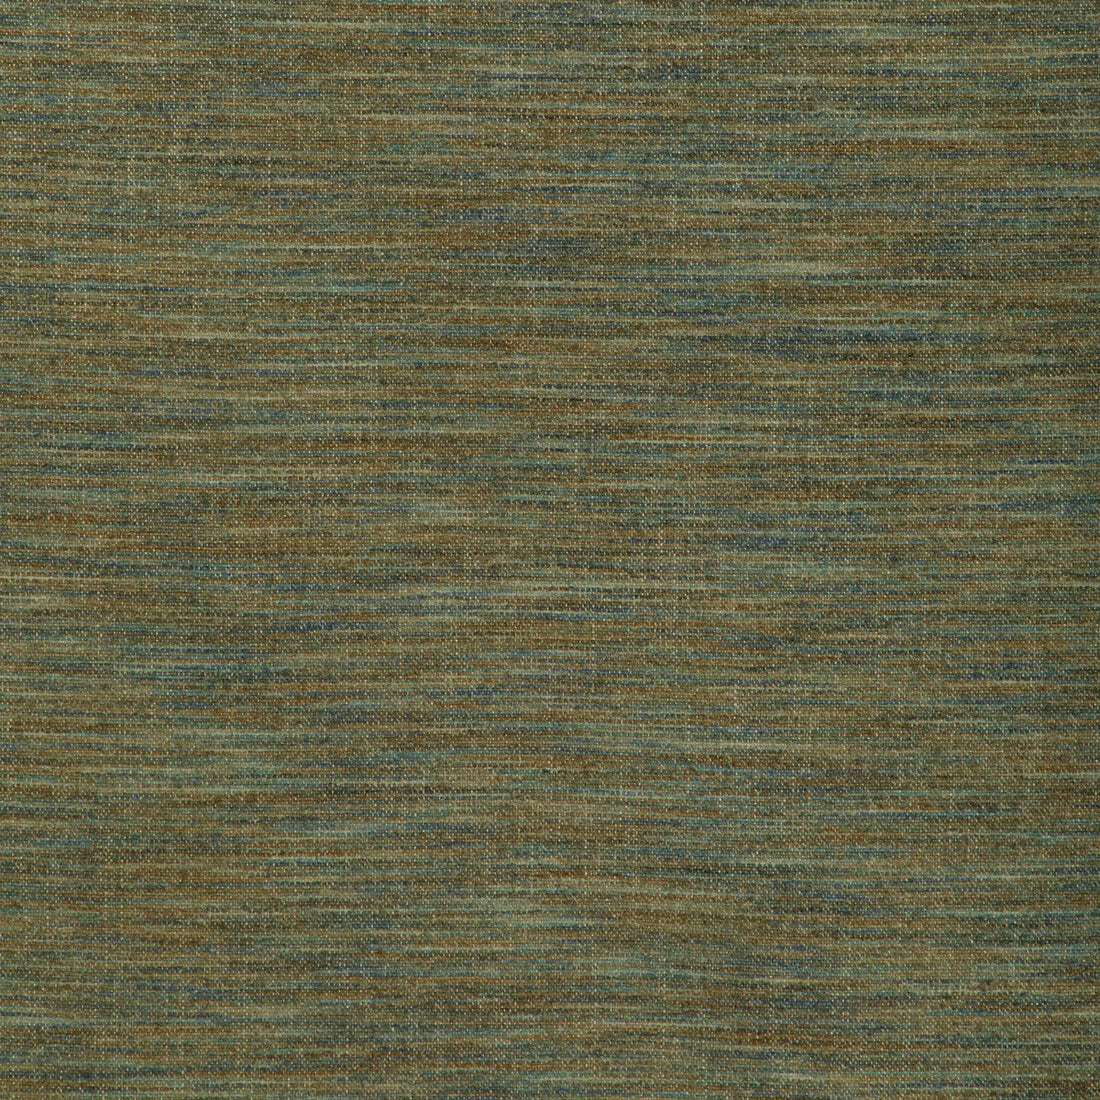 Combes Texture fabric in pool color - pattern 8023131.353.0 - by Brunschwig &amp; Fils in the Arles Weaves collection